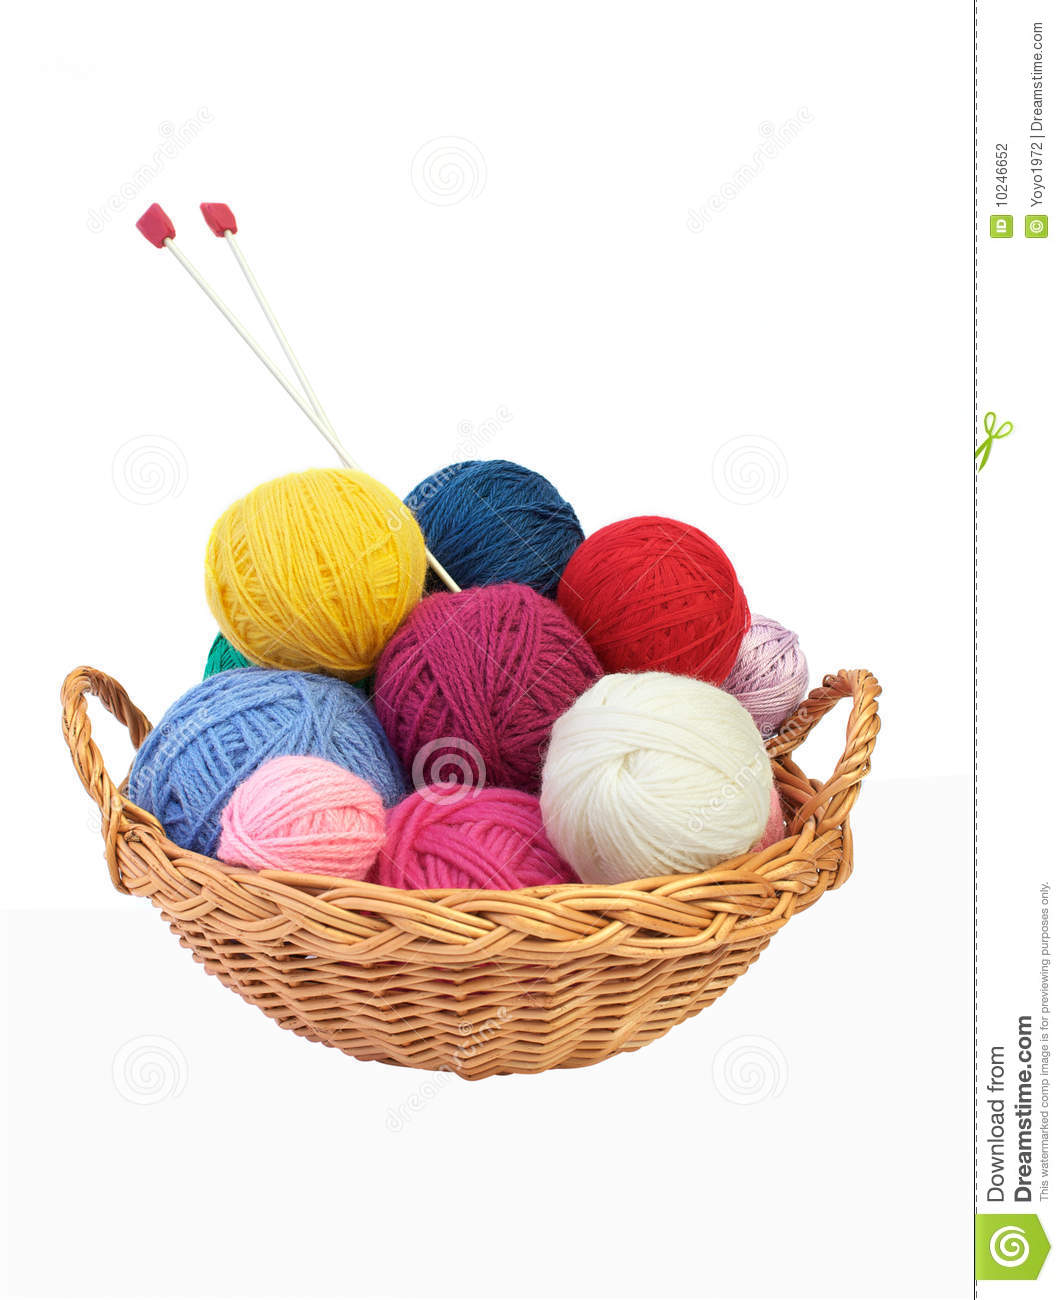 Colorful Yarn Balls And Needles In A Straw Basket Isolated On White